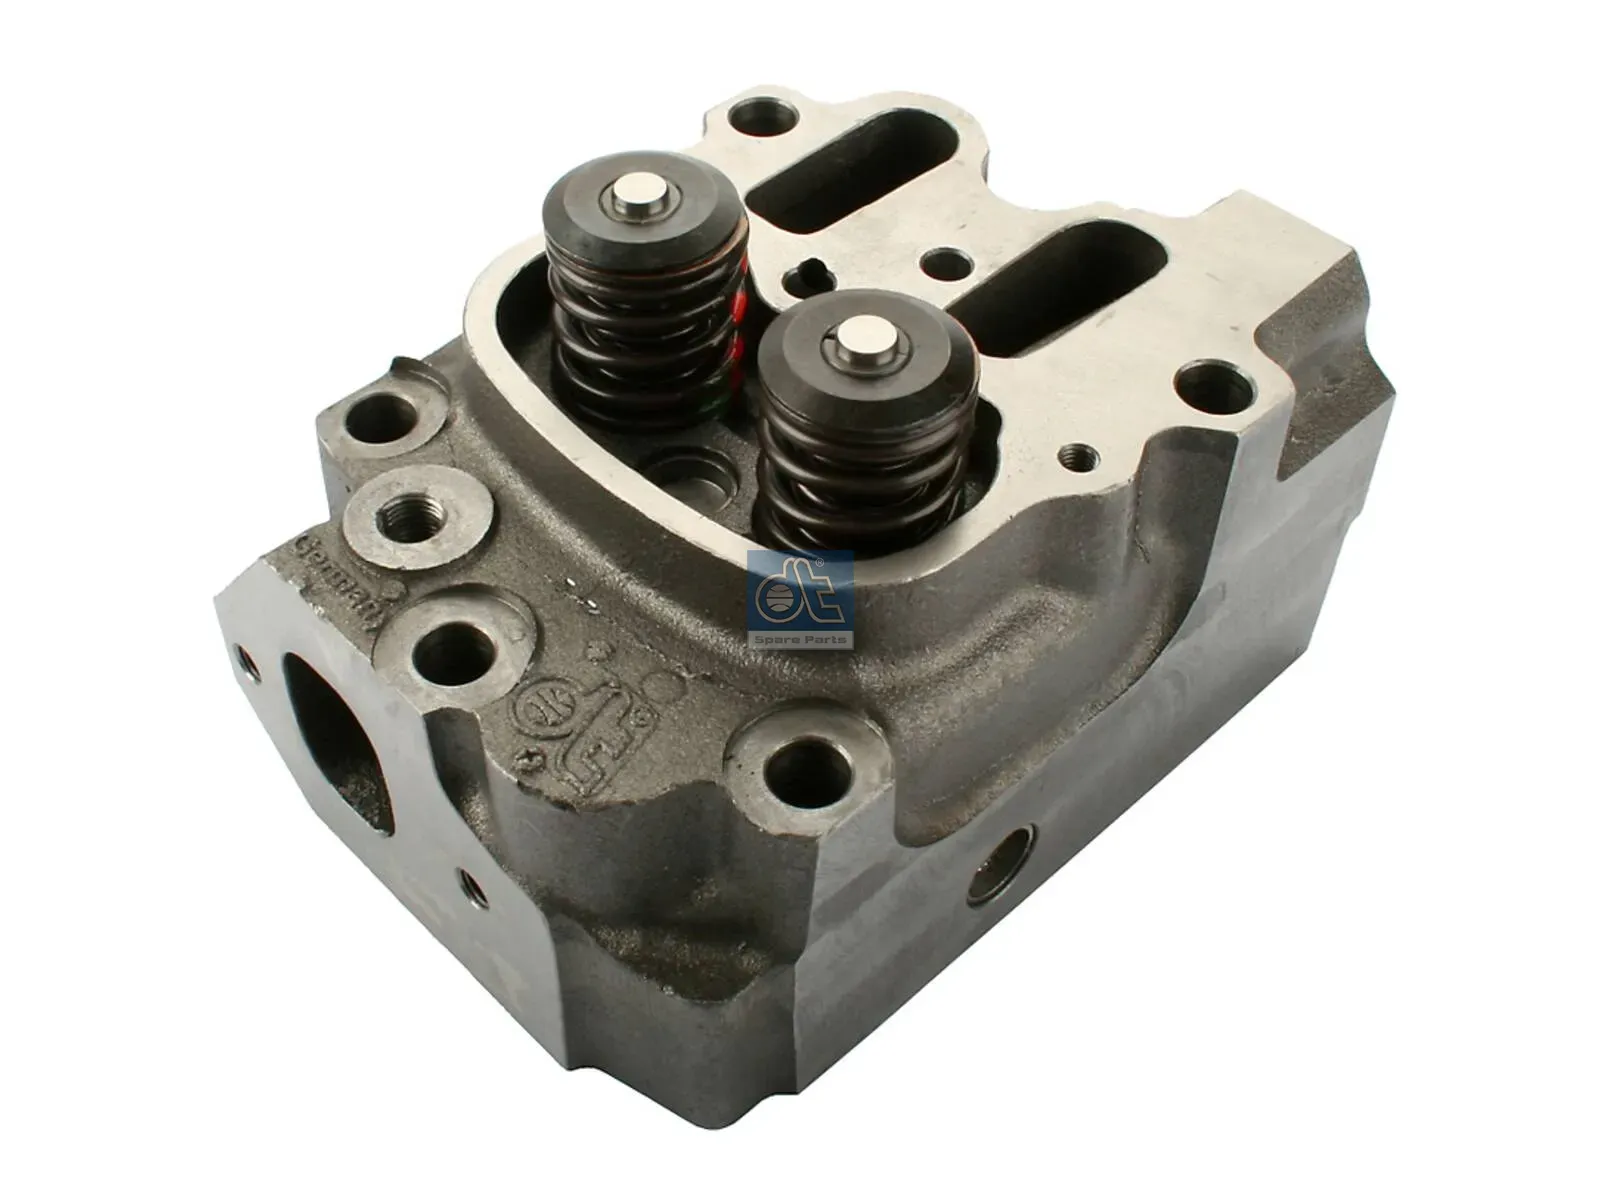 Cylinder head, with valves